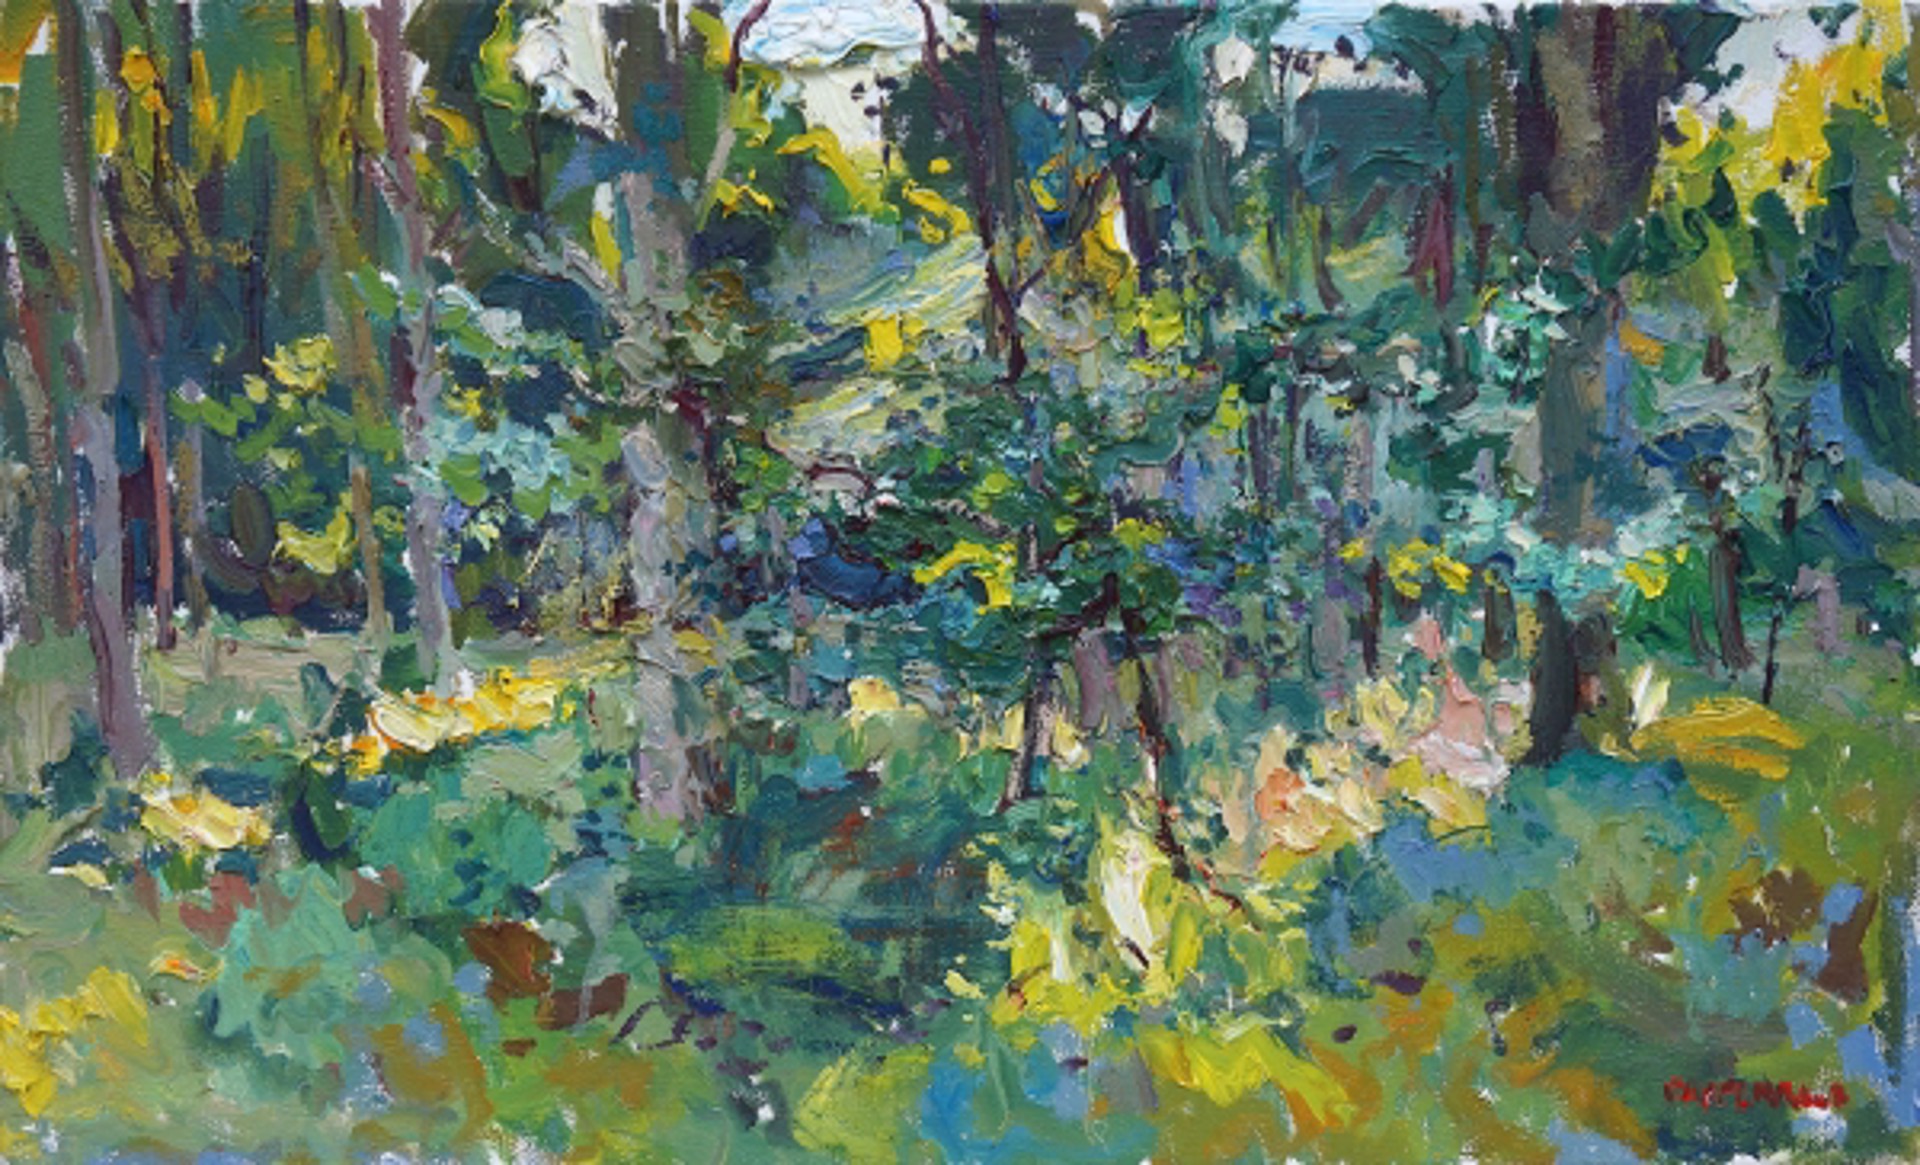 "Morning in the Forest" original oil painting by Antonin Passemard